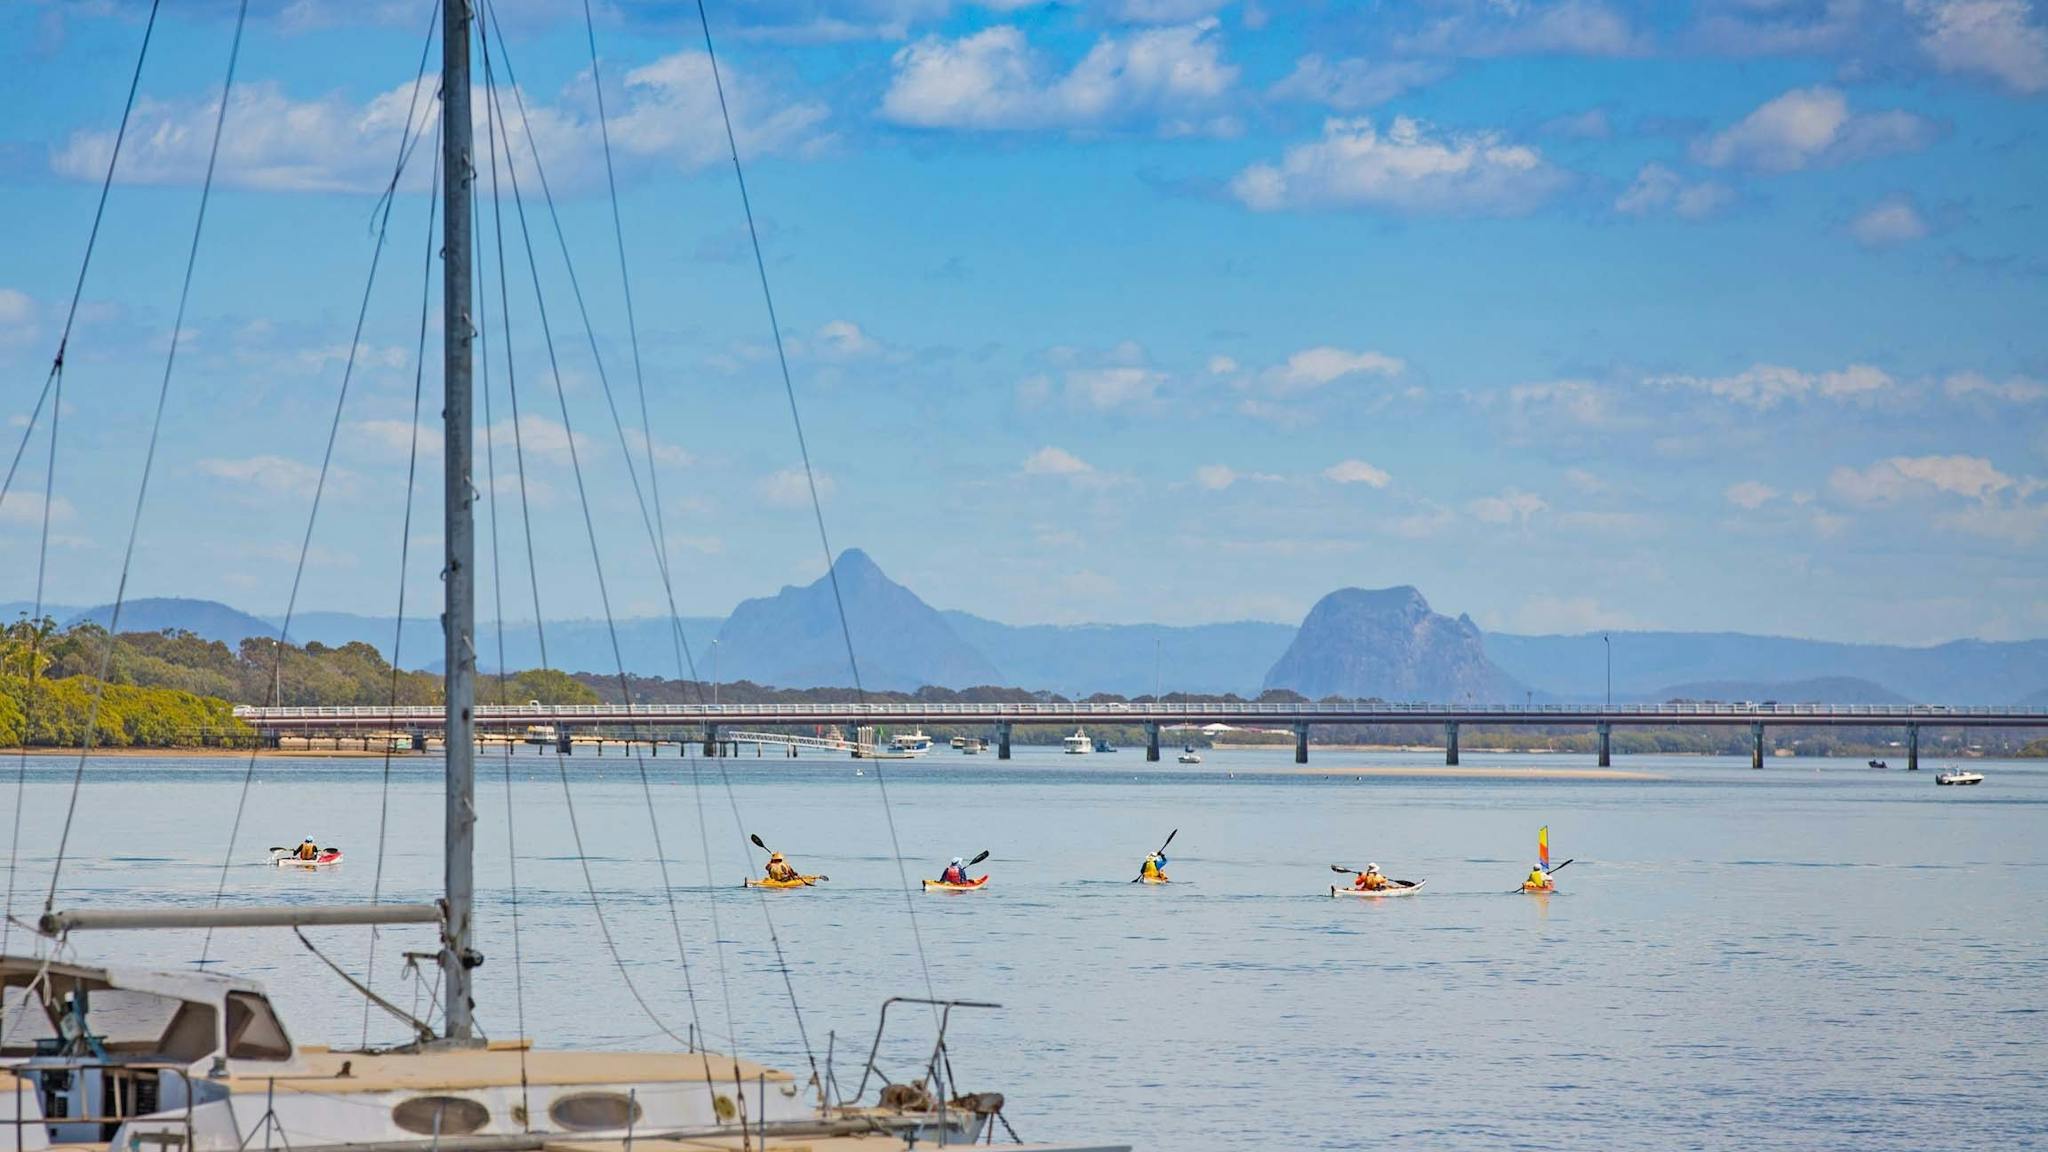 A number of people Kayaking with views of the Bribie Island Bridge and Glasshouse Mountains